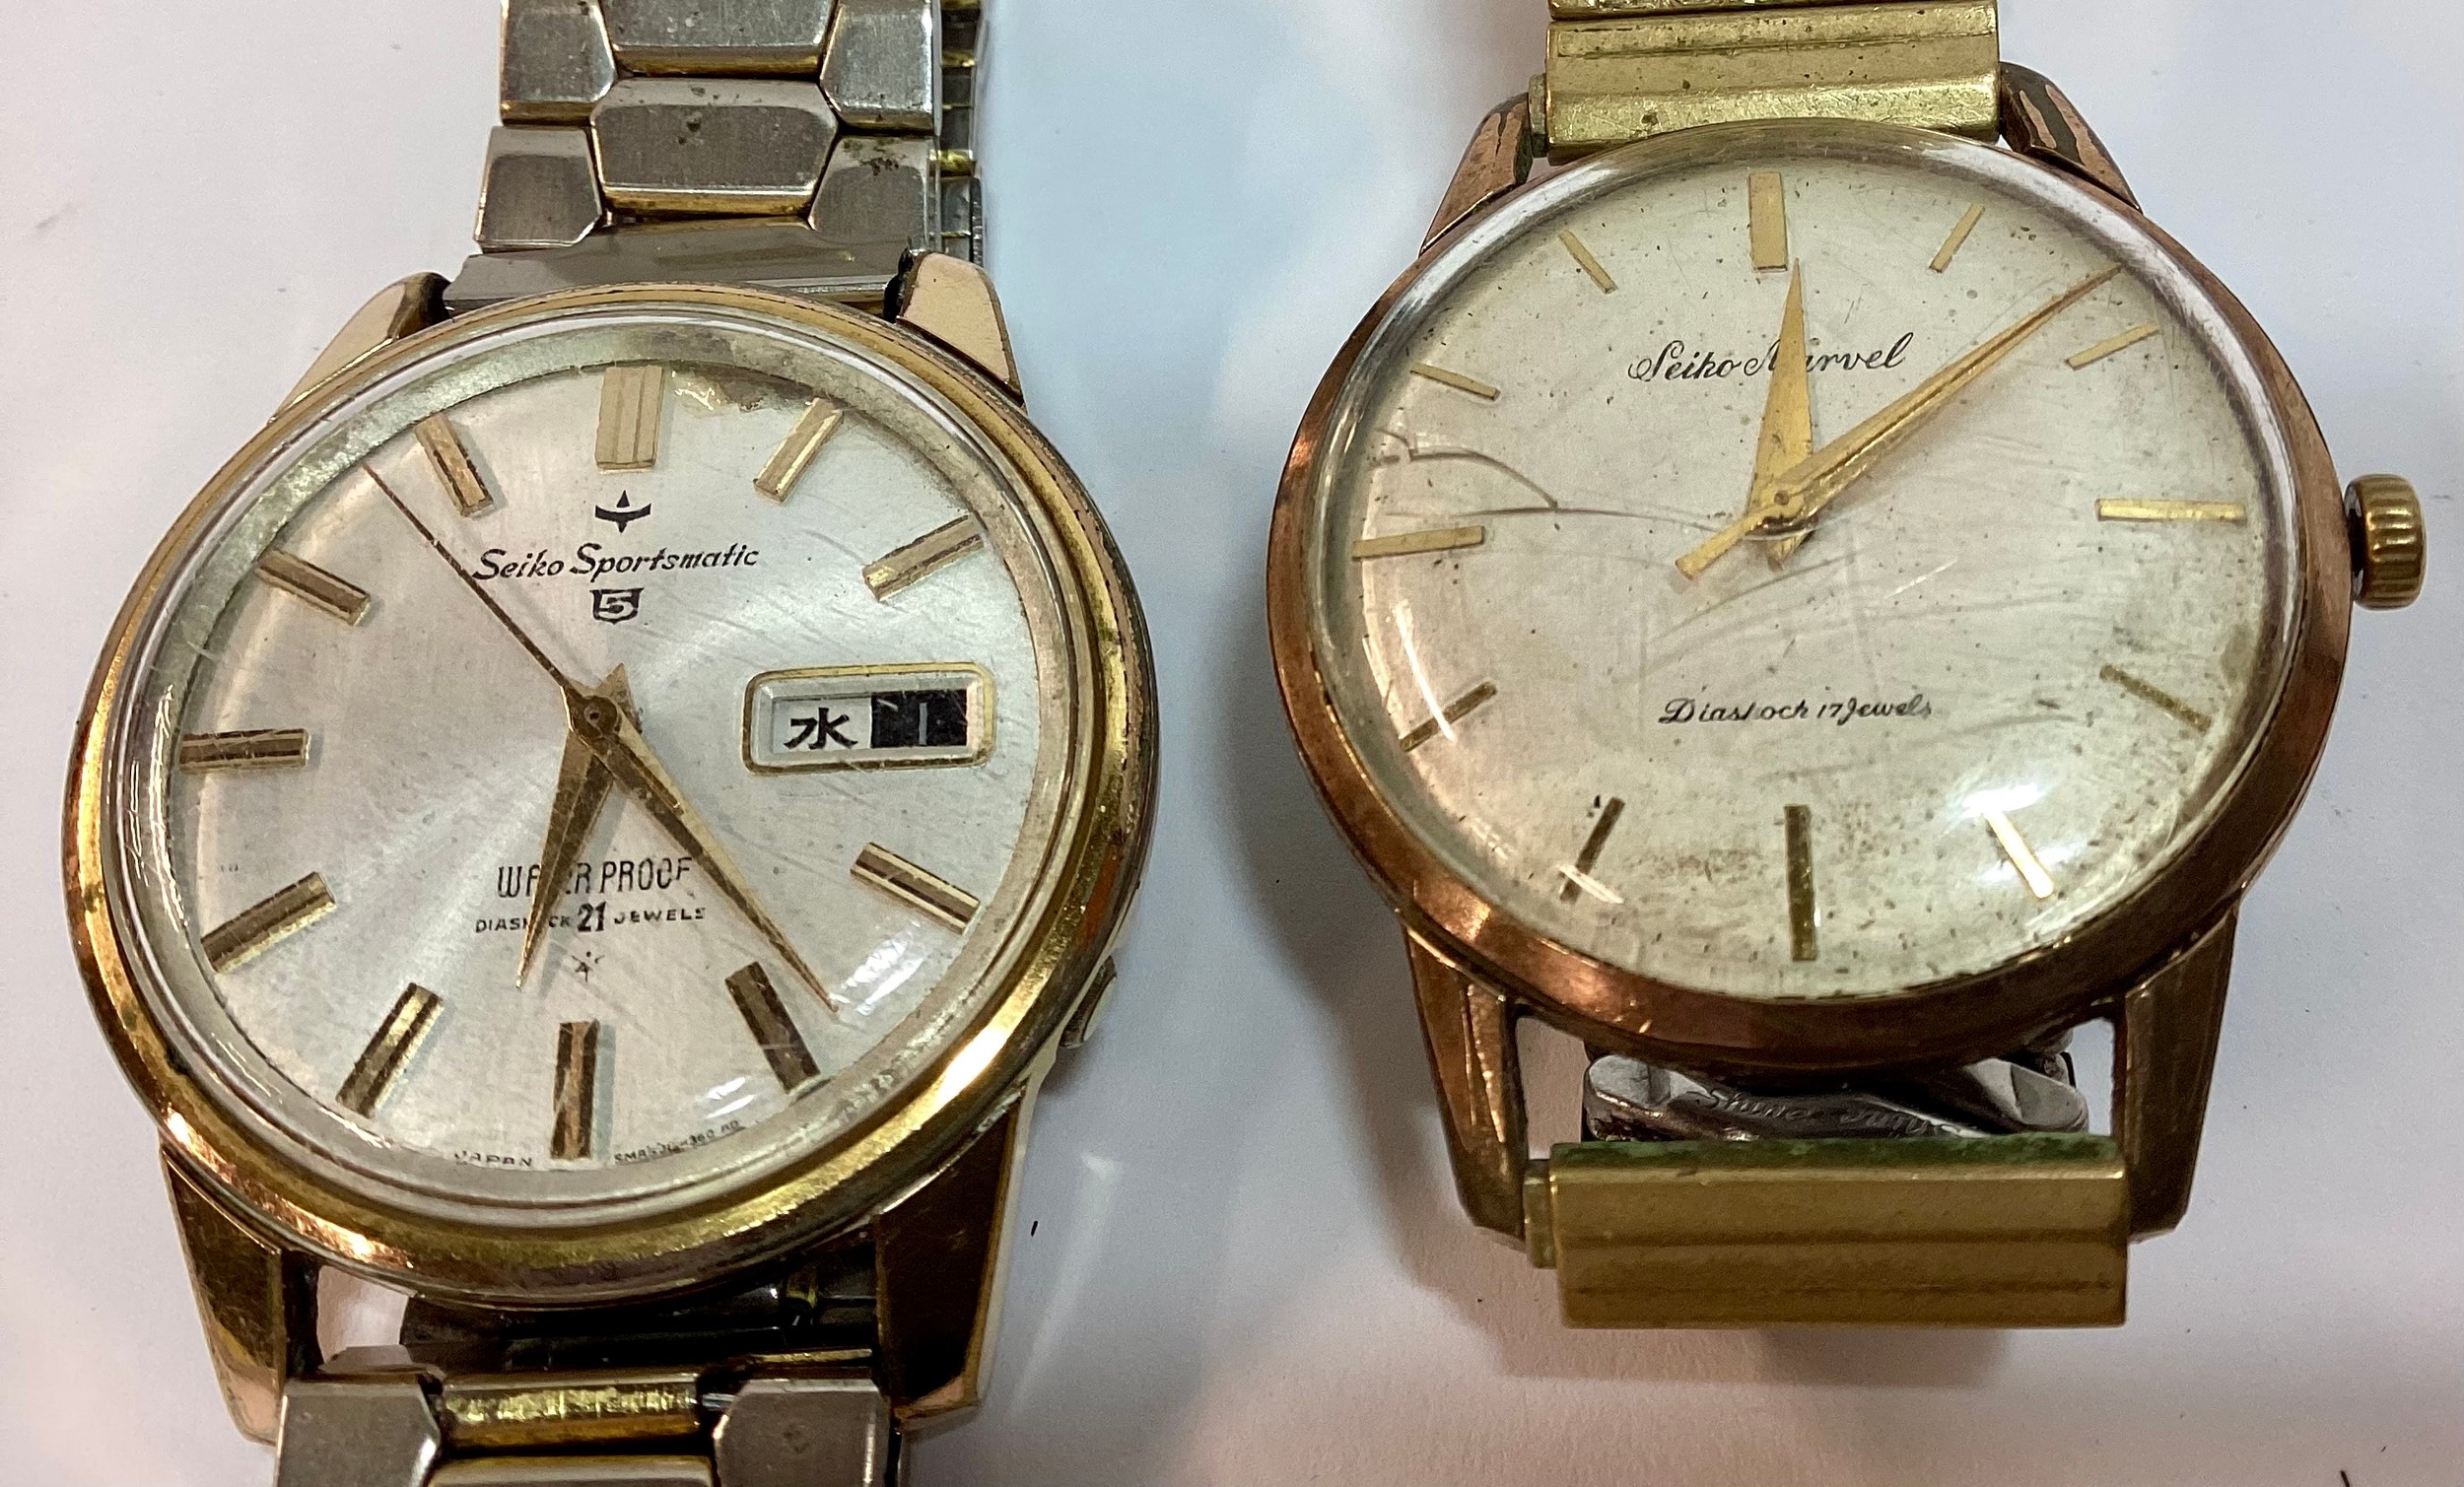 A collection of gents vintage Seiko automatic watches including Actus, Sportsmatic and Marvel - Image 4 of 5